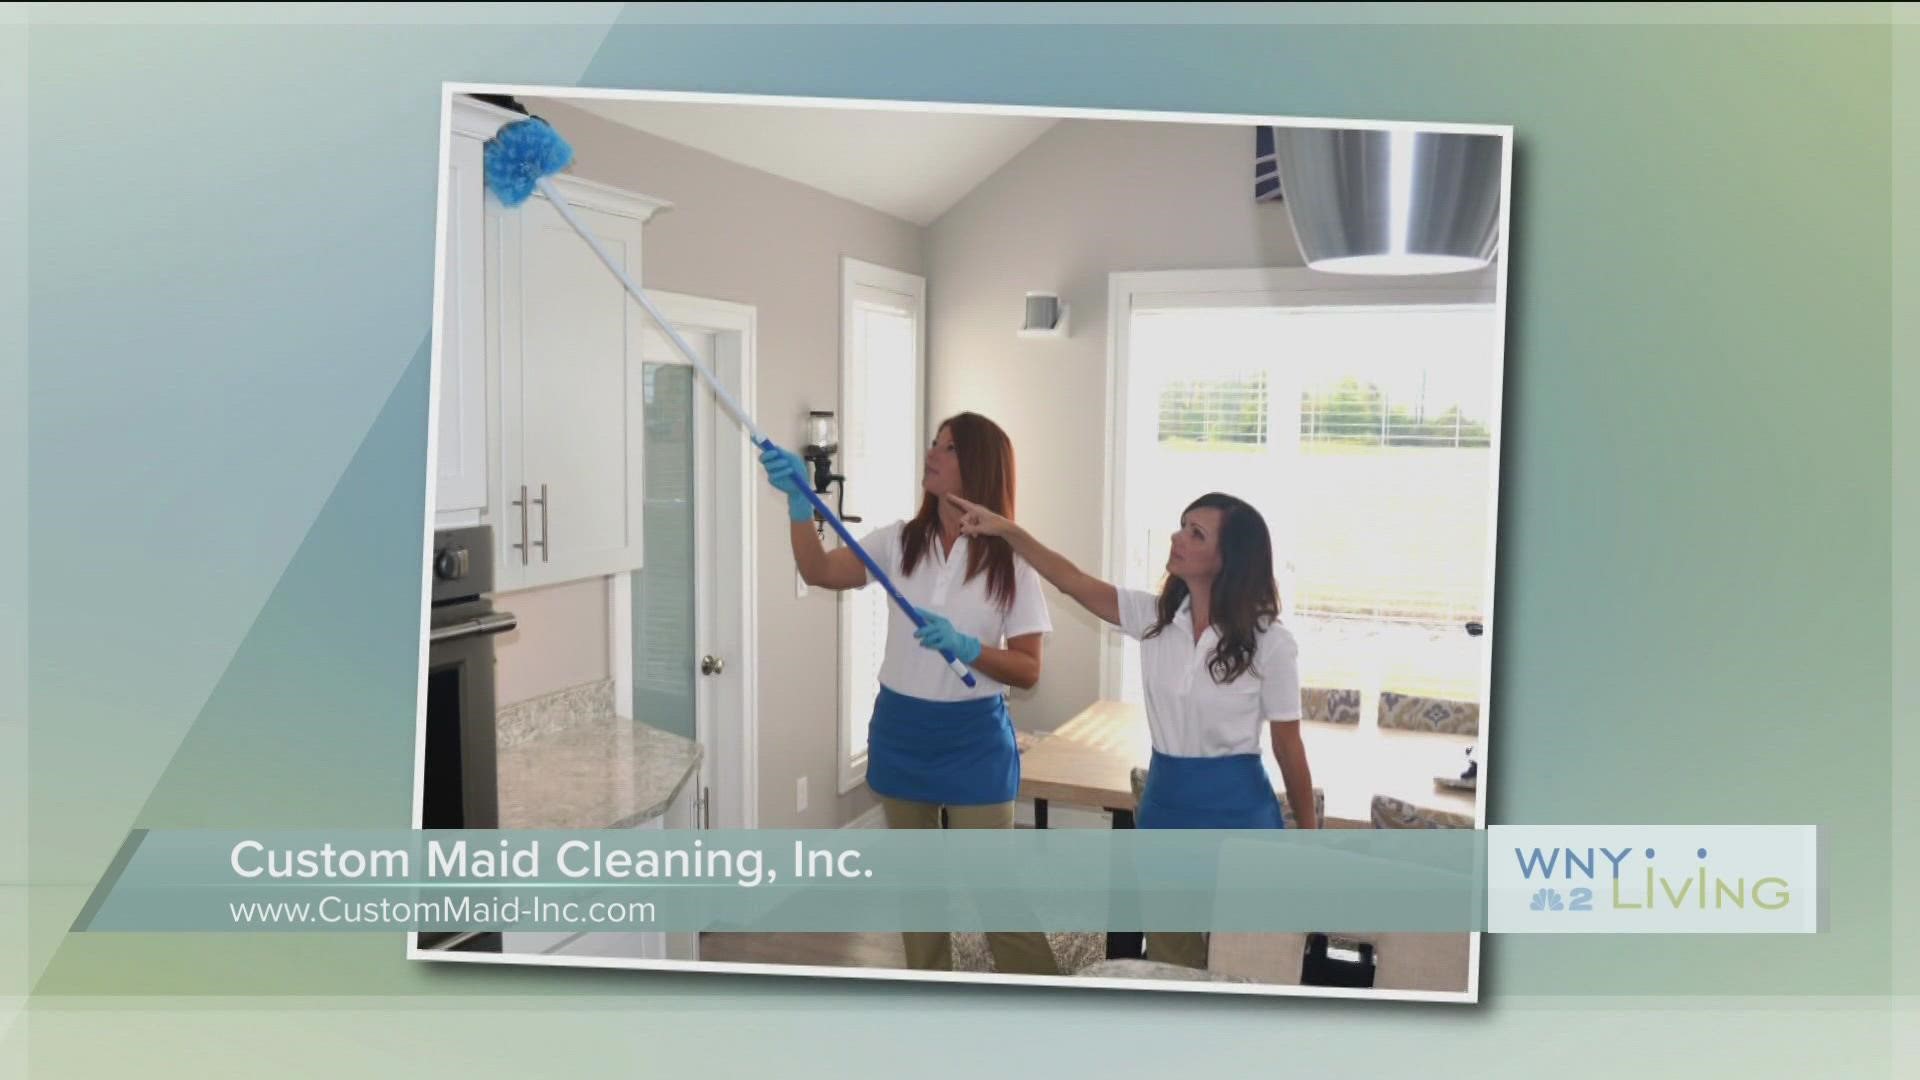 WNY Living - November 26 - Custom Maid Cleaning (THIS VIDEO IS SPONSORED BY CUSTOM MAID CLEANING)